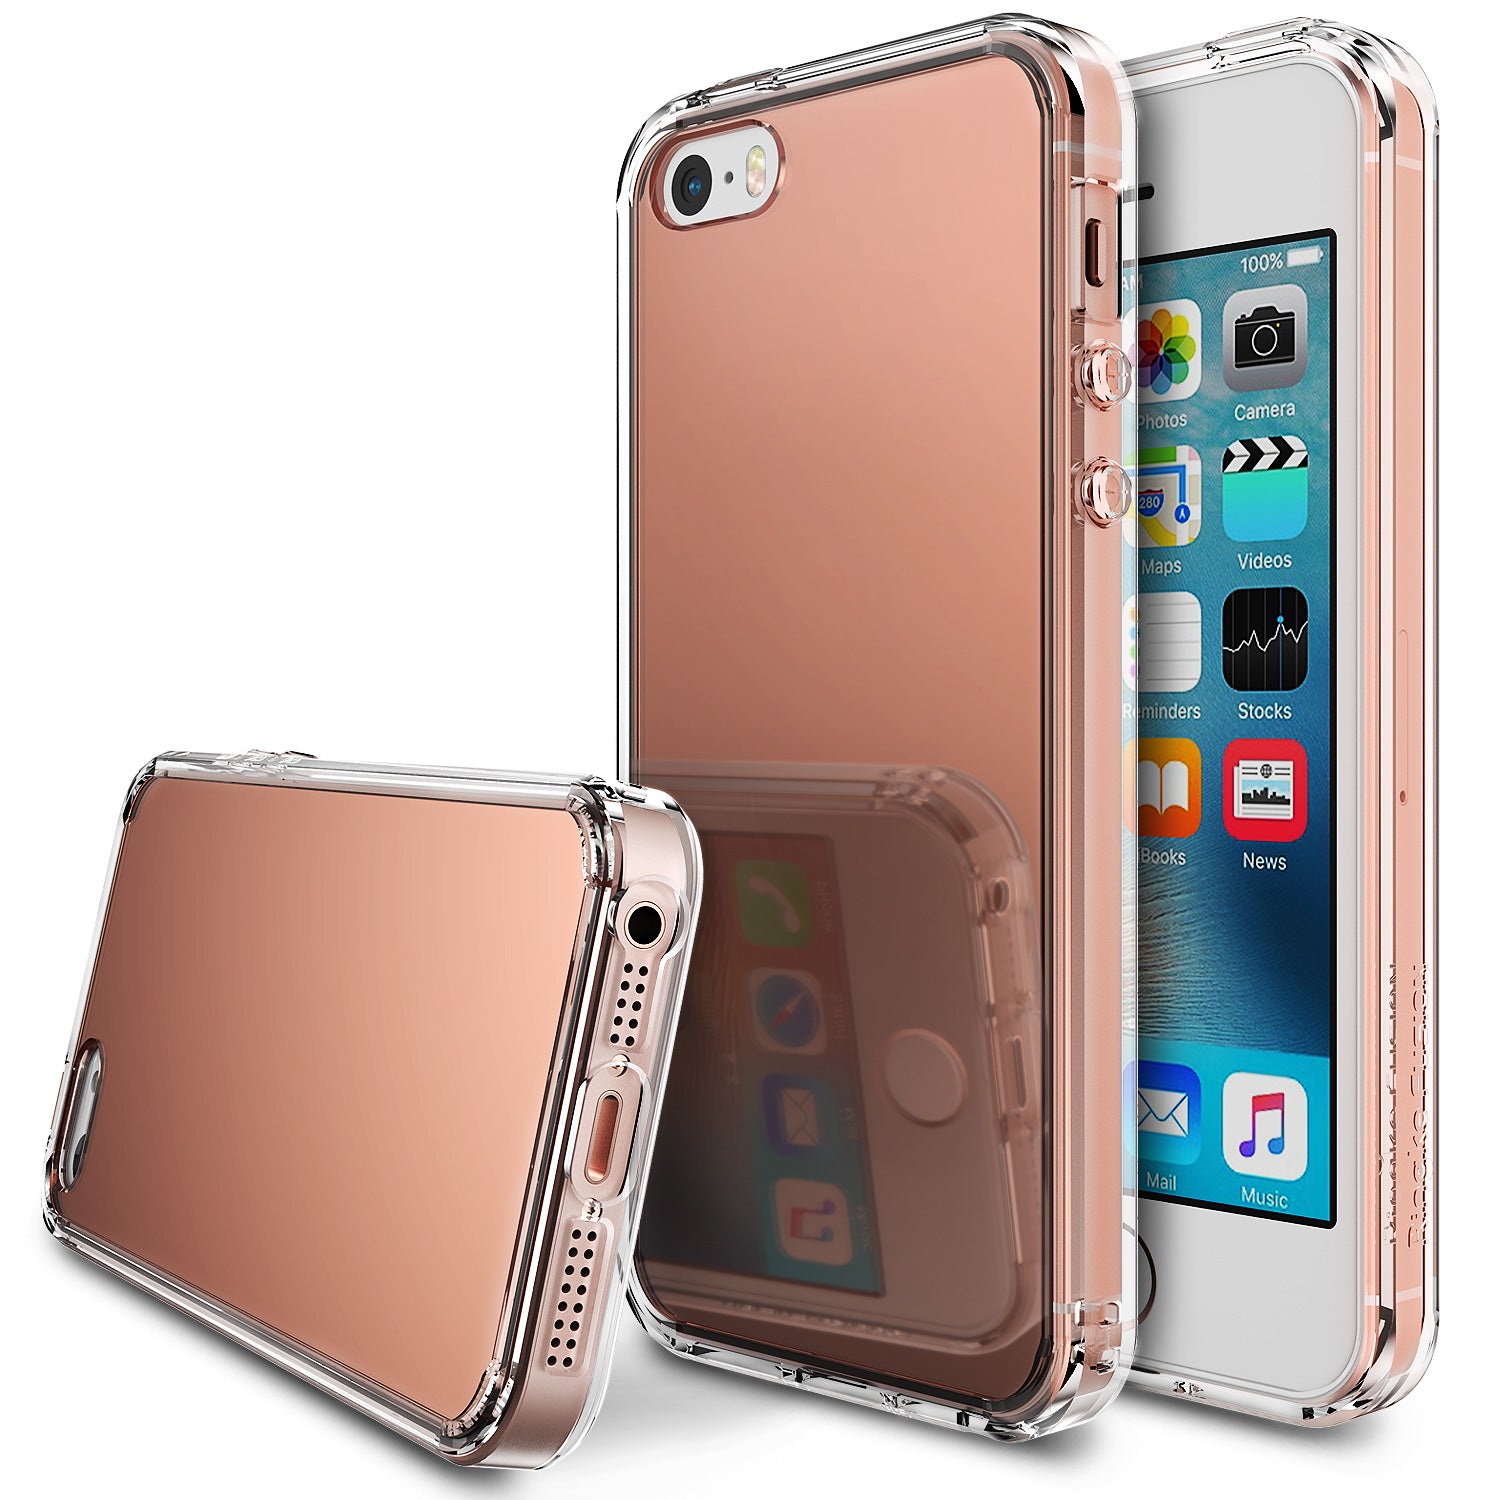 ringke mirror back case cover for iphone se 5s 5 main rose gold